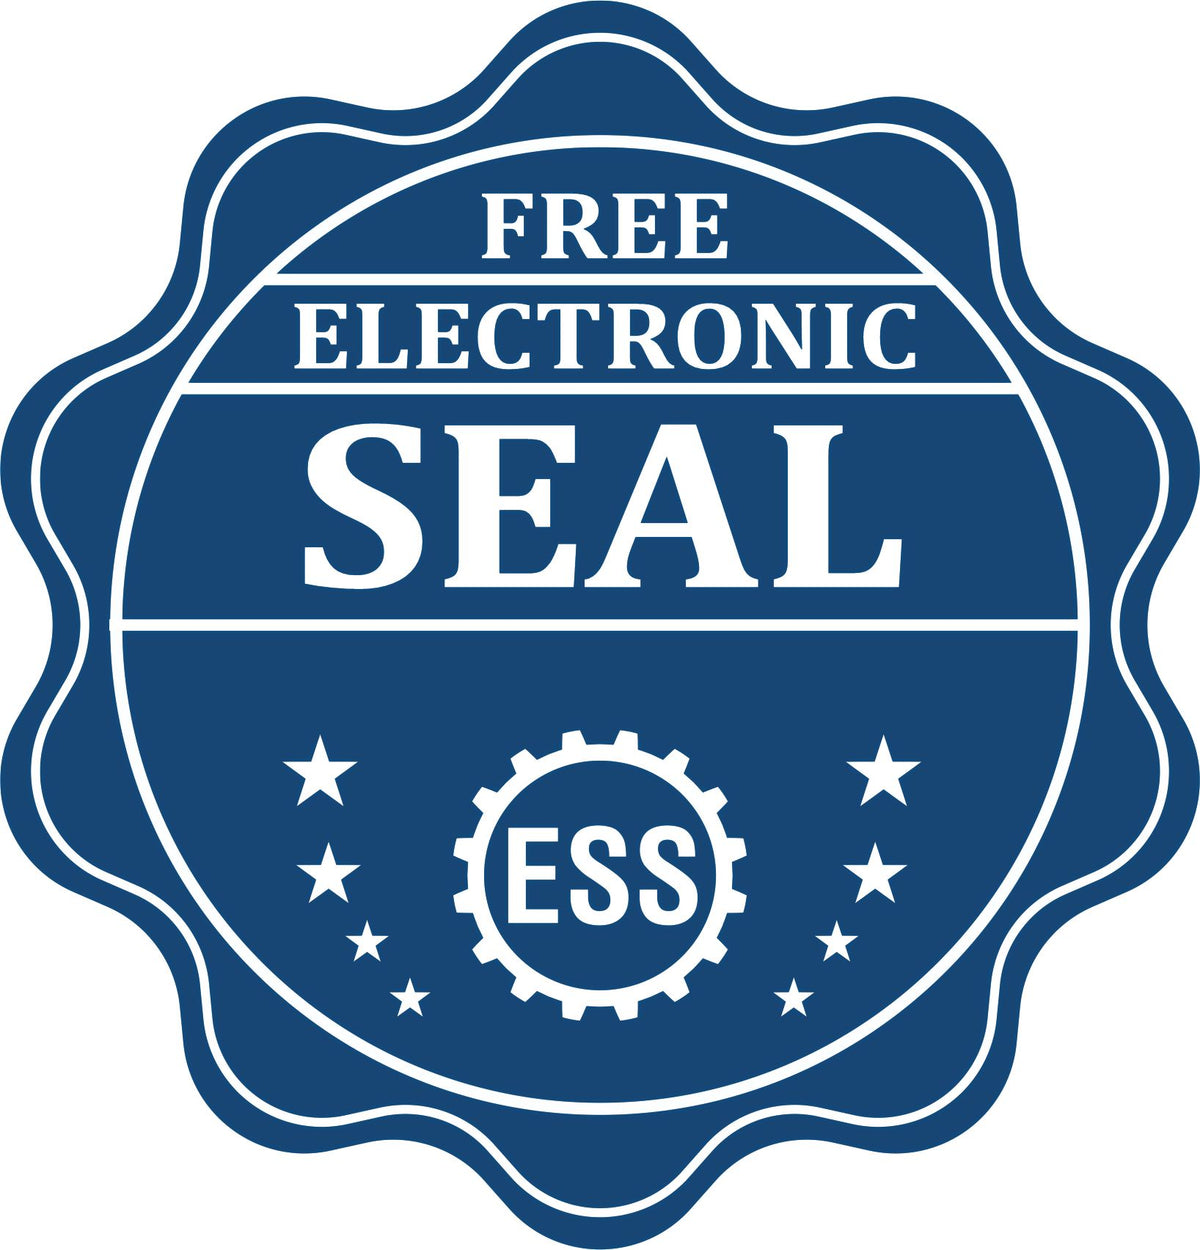 A badge showing a free electronic seal for the Slim Pre-Inked Alabama Architect Seal Stamp with stars and the ESS gear on the emblem.